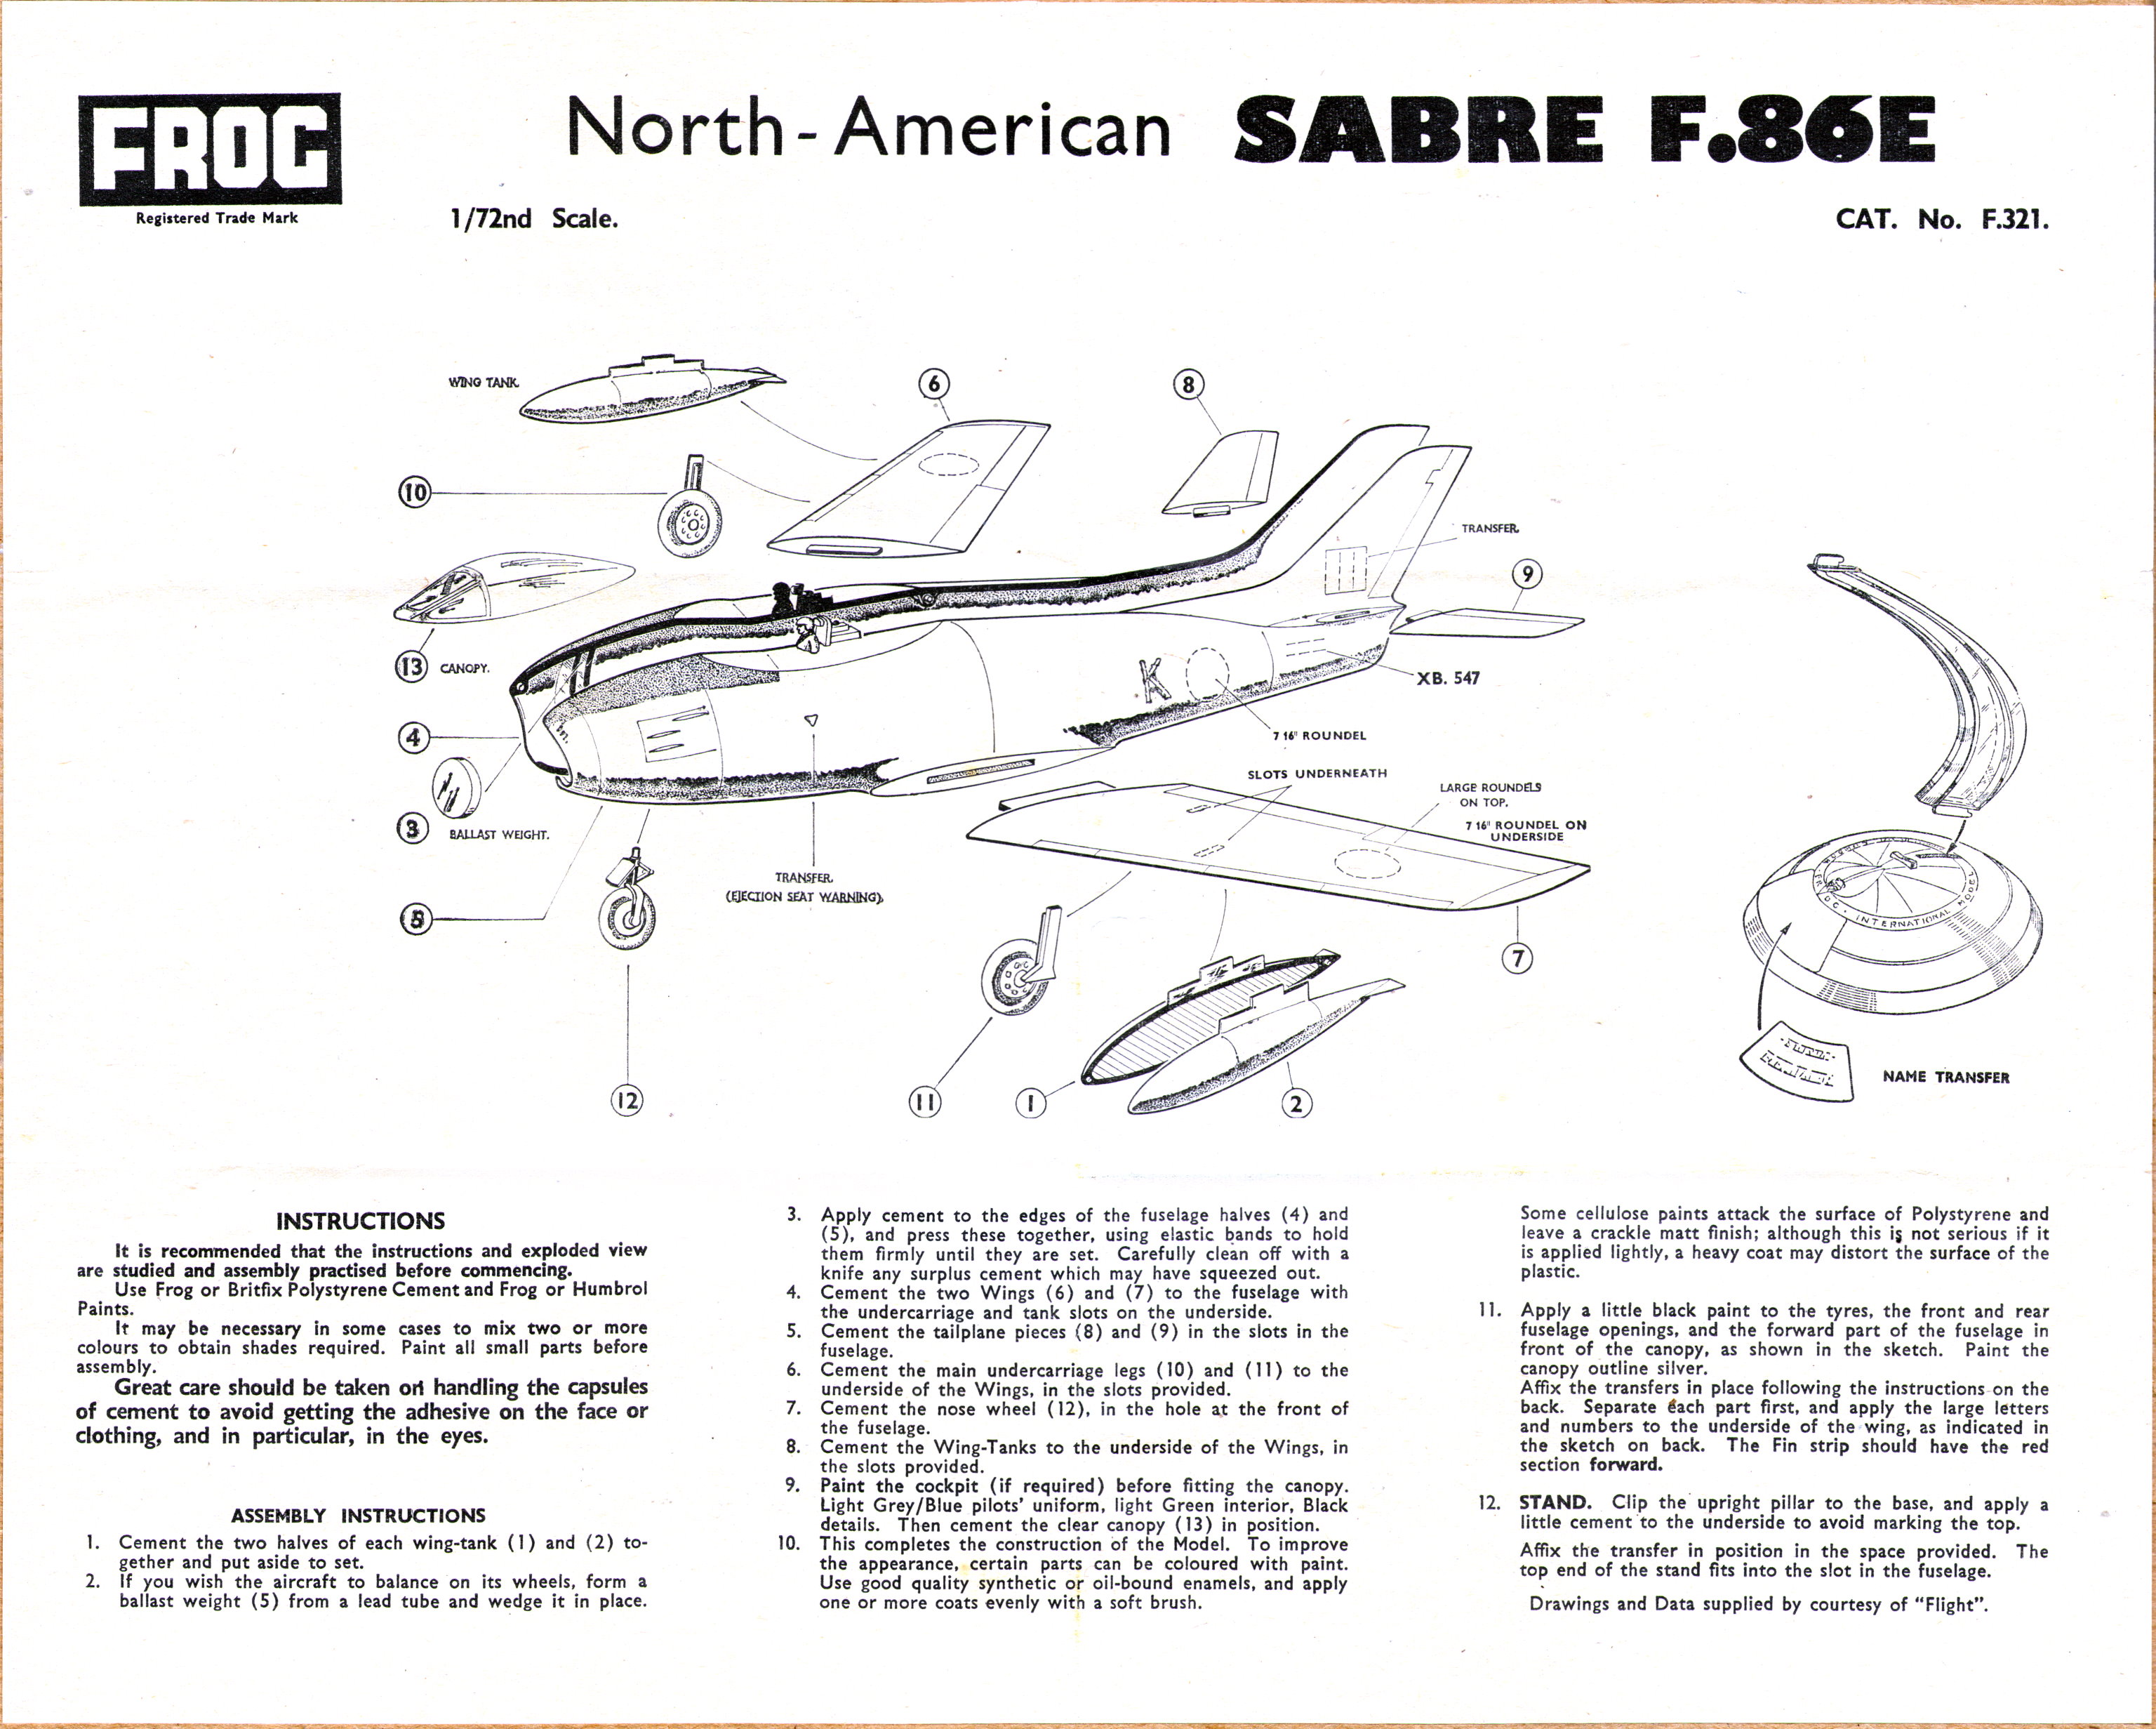 FROG Red Series F321 North American Sabre F-86E Swept Wing Jet Fighter, IMA, 1965, assembly instruction